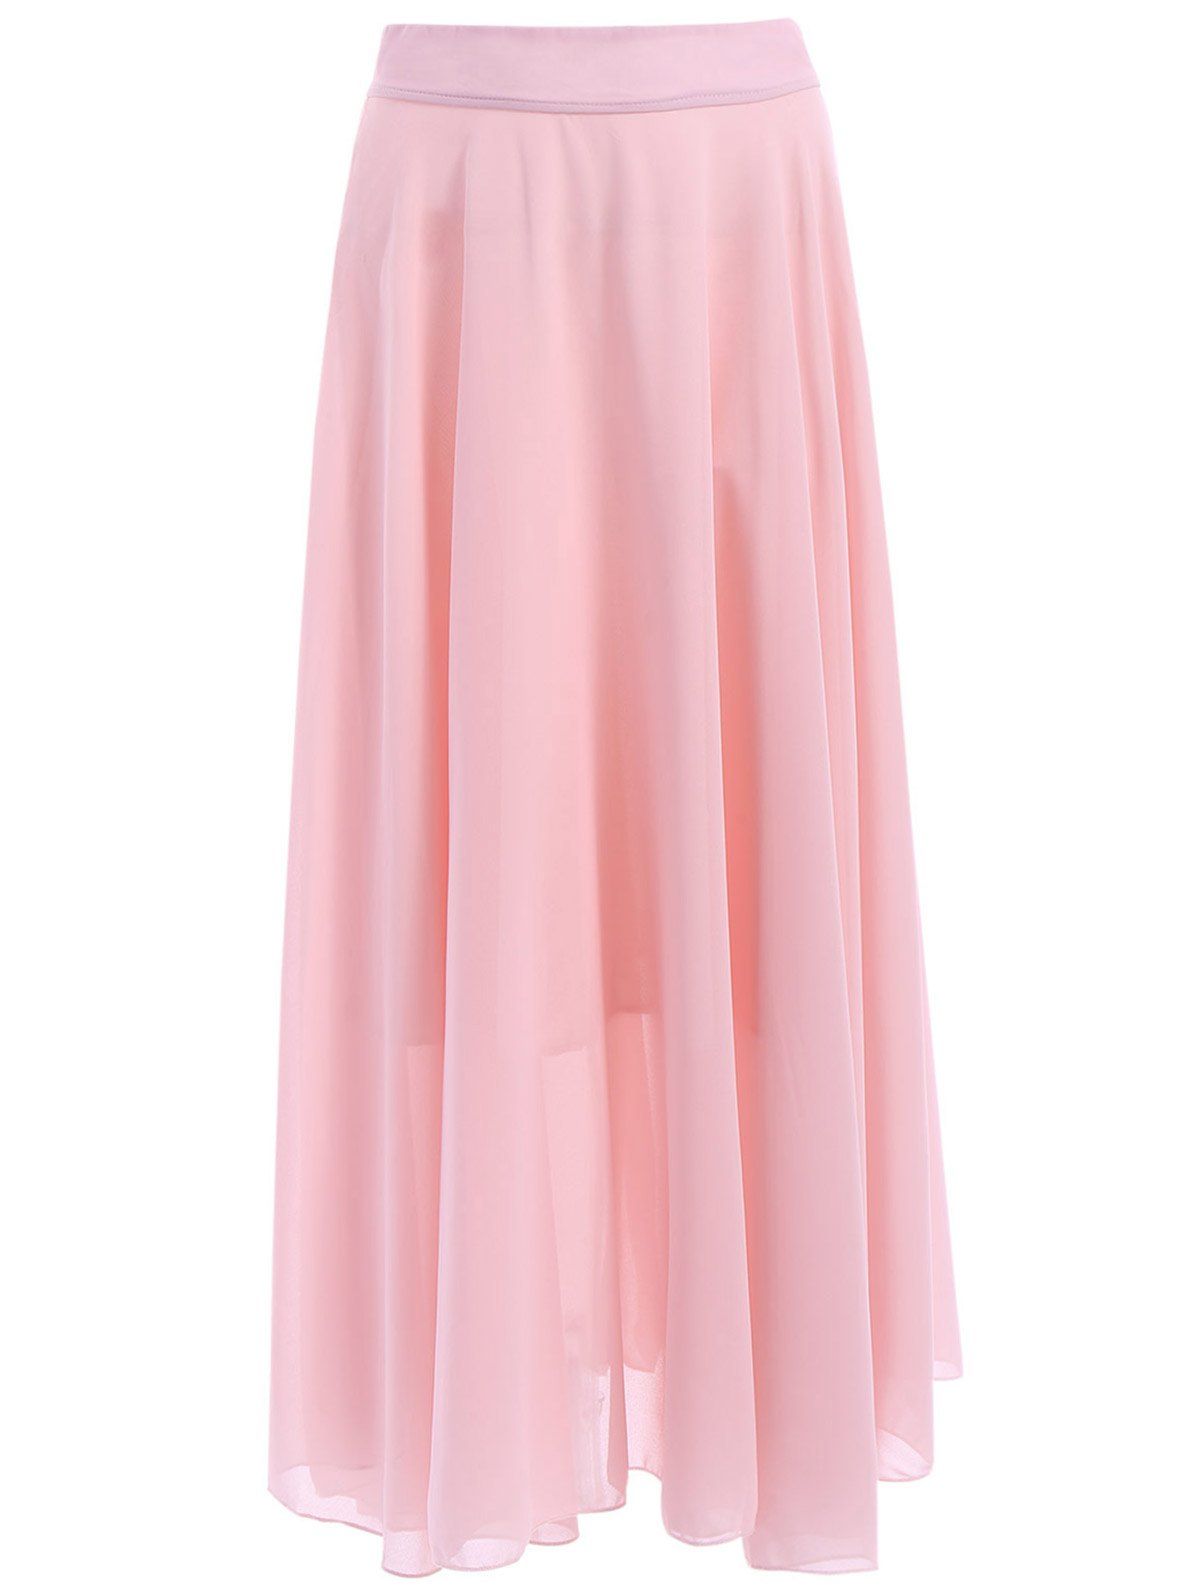 [41% OFF] 2020 Sweet High Waist Pleated Pink Maxi Skirt For Women In ...